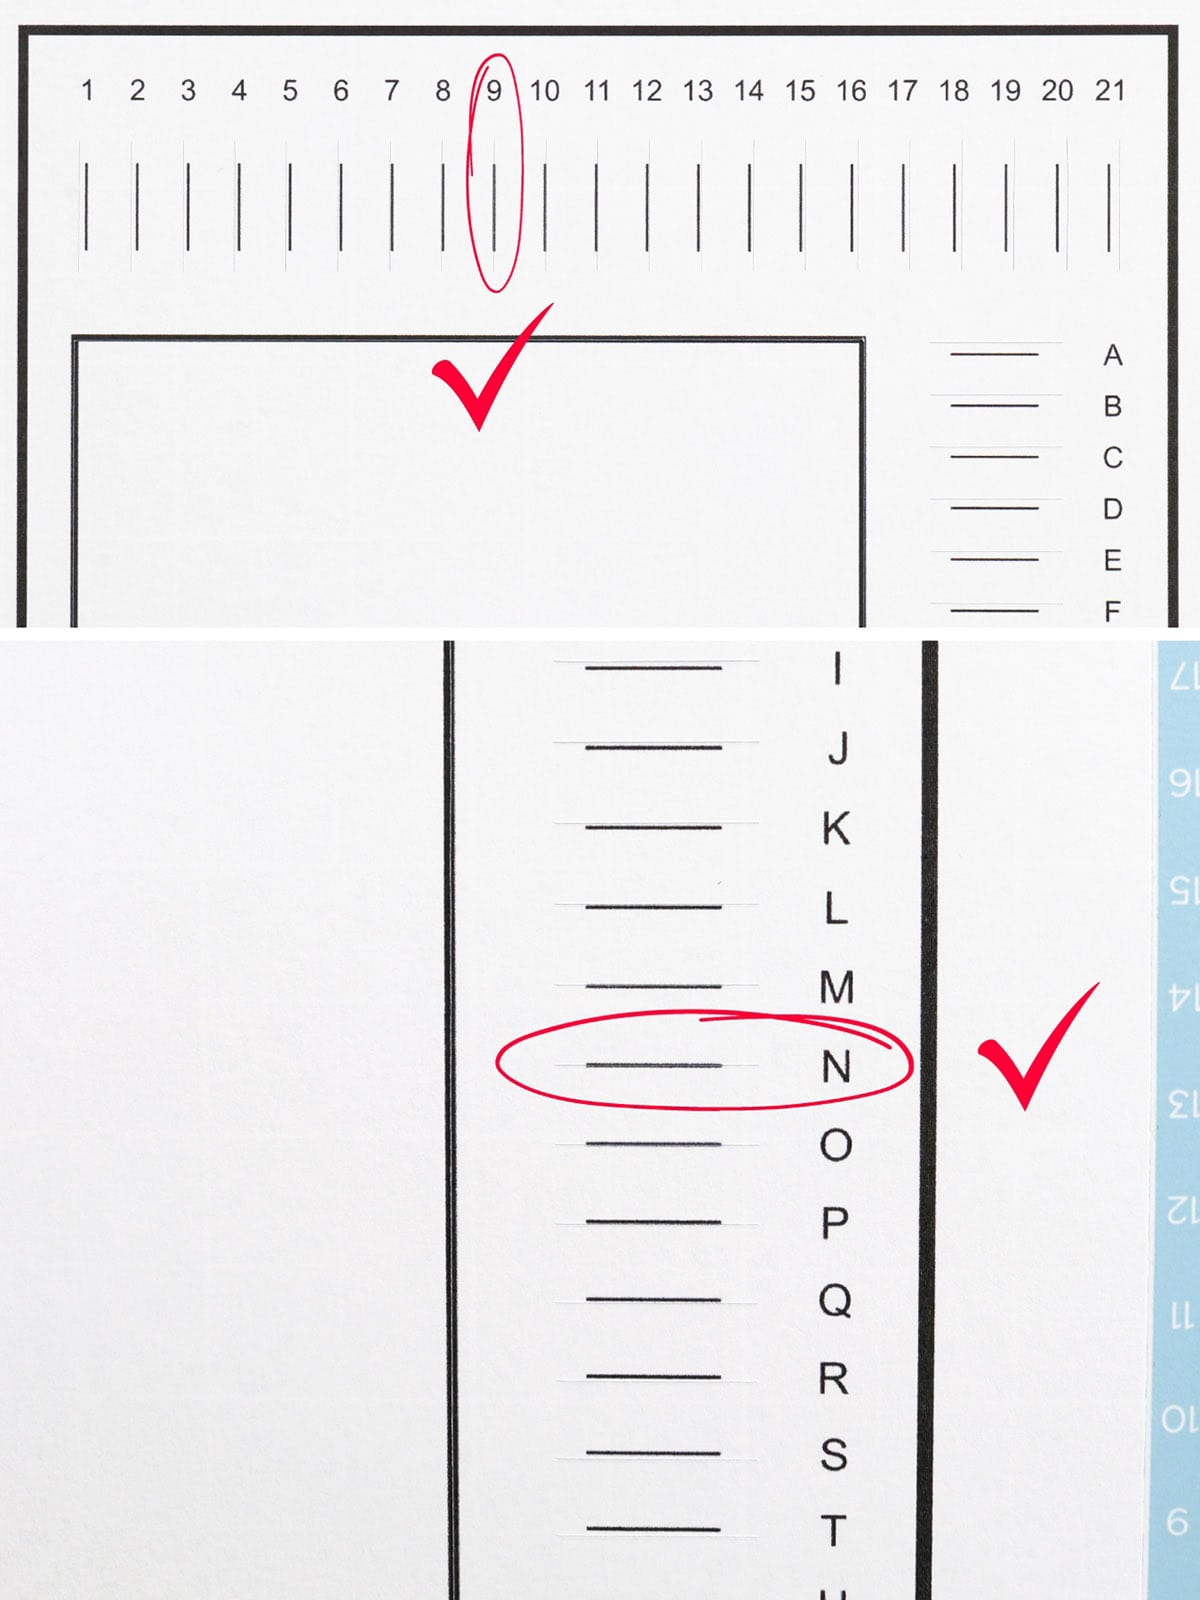 Cricut calibration sheet with cut lines, showing which line has been cut perfect and which number and letter to select when calibrating